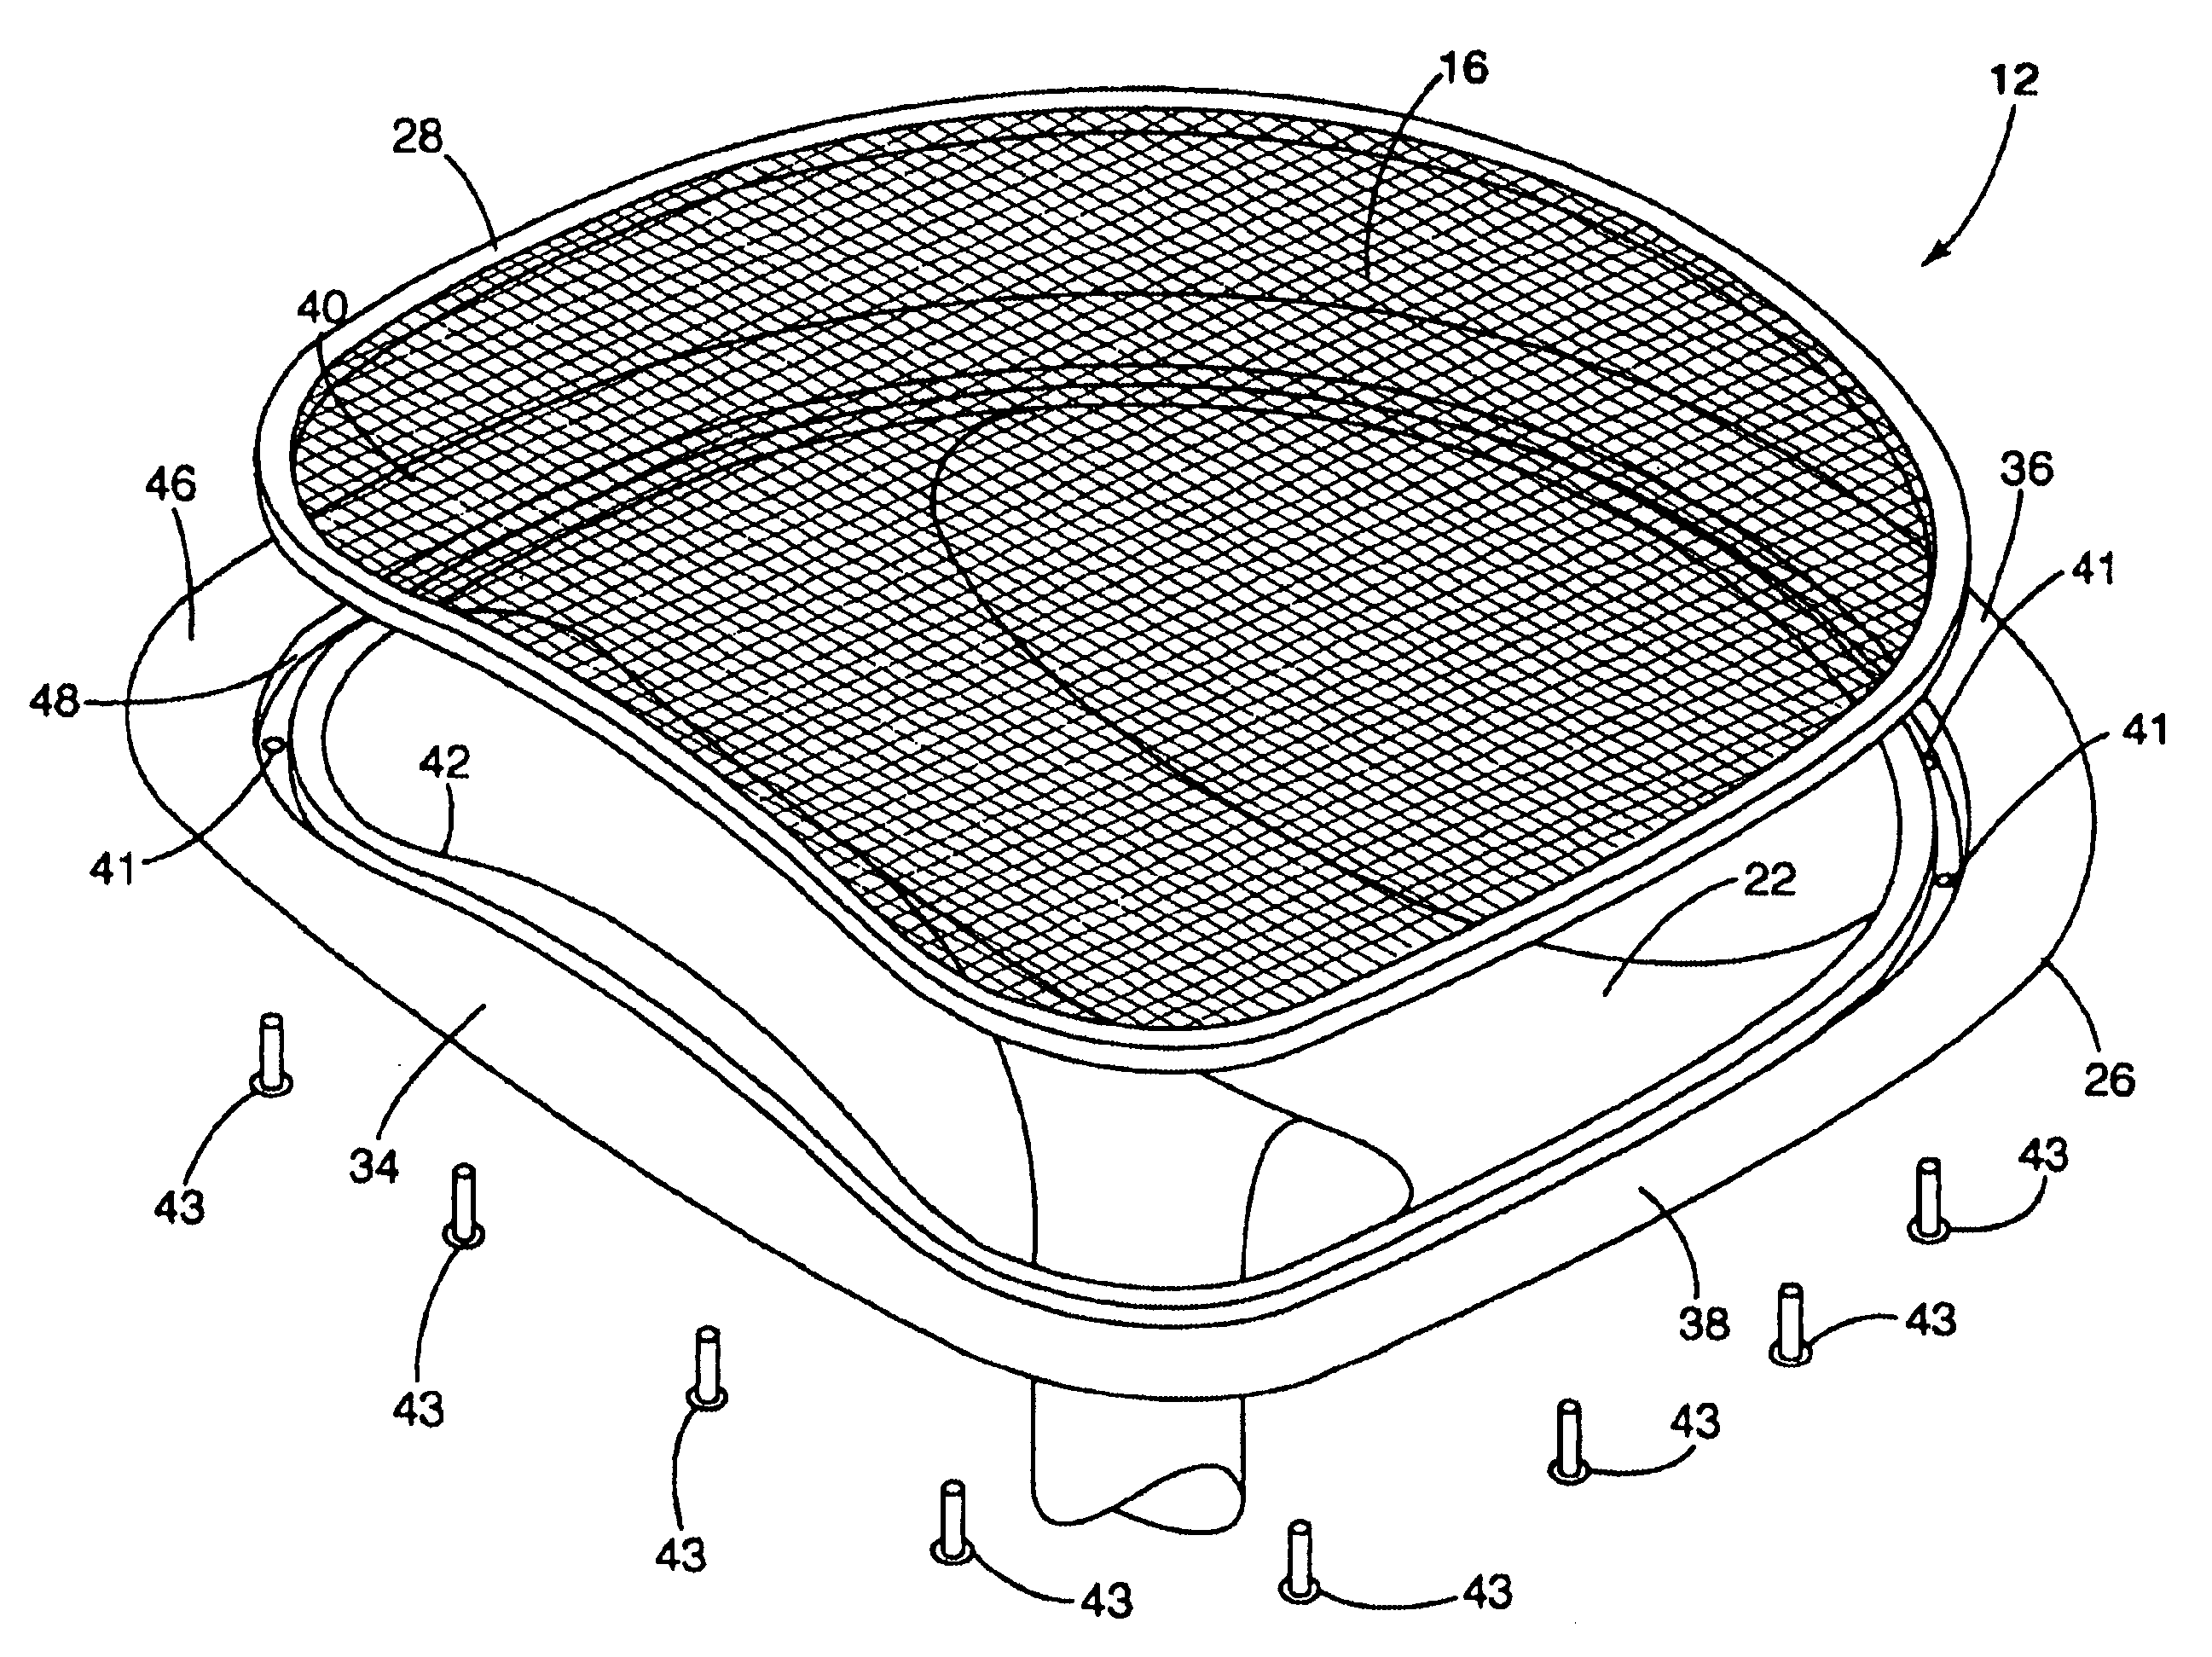 Carrier and attachment method for load-bearing fabric